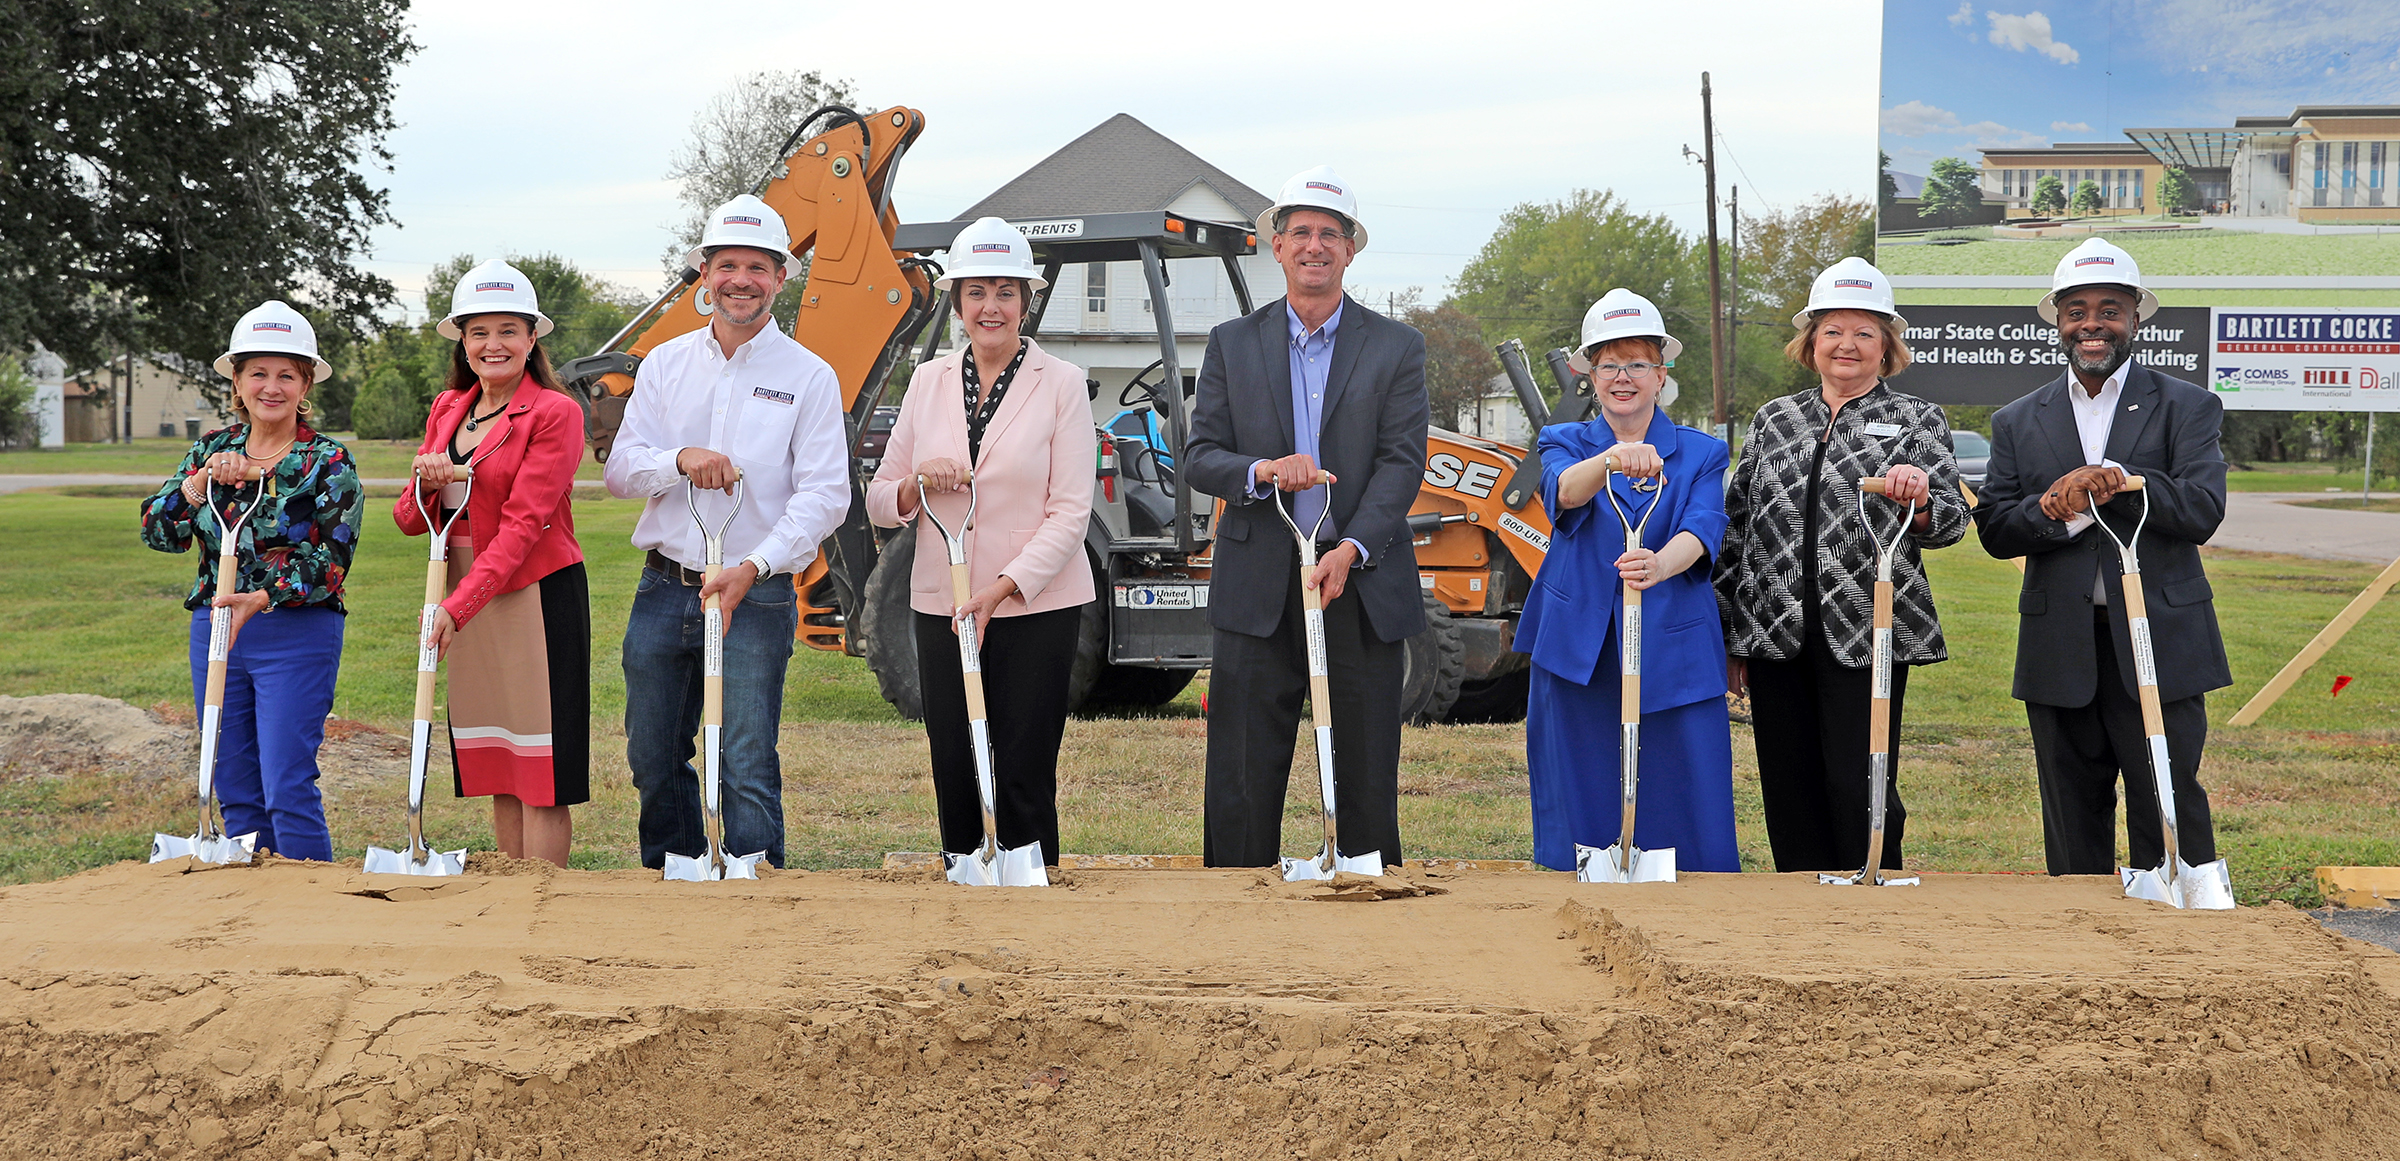 Lamar State College Port Arthur celebrated a groundbreaking on Monday, November 6, for the $37.4 million Allied Health and Science Building. Pictured, from left, are LSCPA Executive Vice President for Finance and Operations Mary Wickland, Dean of Academic and Technical Programs Dr. Melissa Armentor, Stantec Principal Steve Parker, LSCPA President Dr. Betty Reynard, Bartlett Cocke General Contractors Project Manager James Pallone, LSCPA Vice President for Academic Affairs Dr. Pamela Millsap, Director of Allied Health Shirley MacNeill, and Hill International Project Manager Marcus Swayzer.